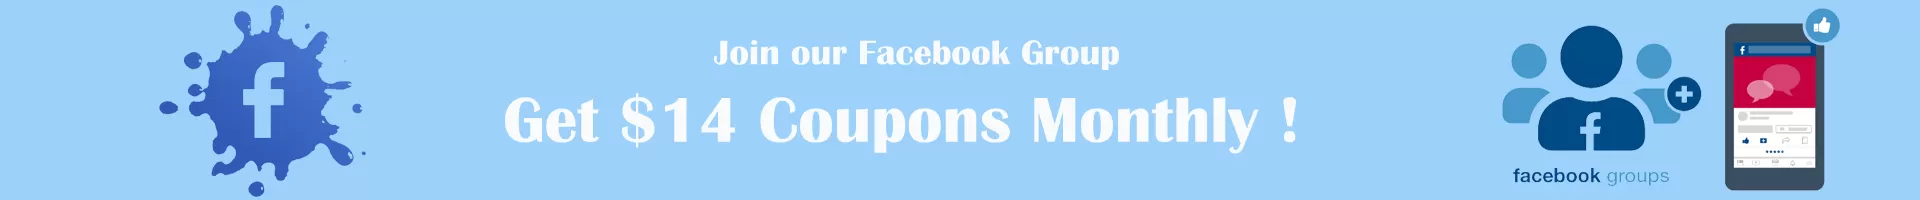 JOIN FBACEBOOK GROUP TO GET COUPONS - acejersey